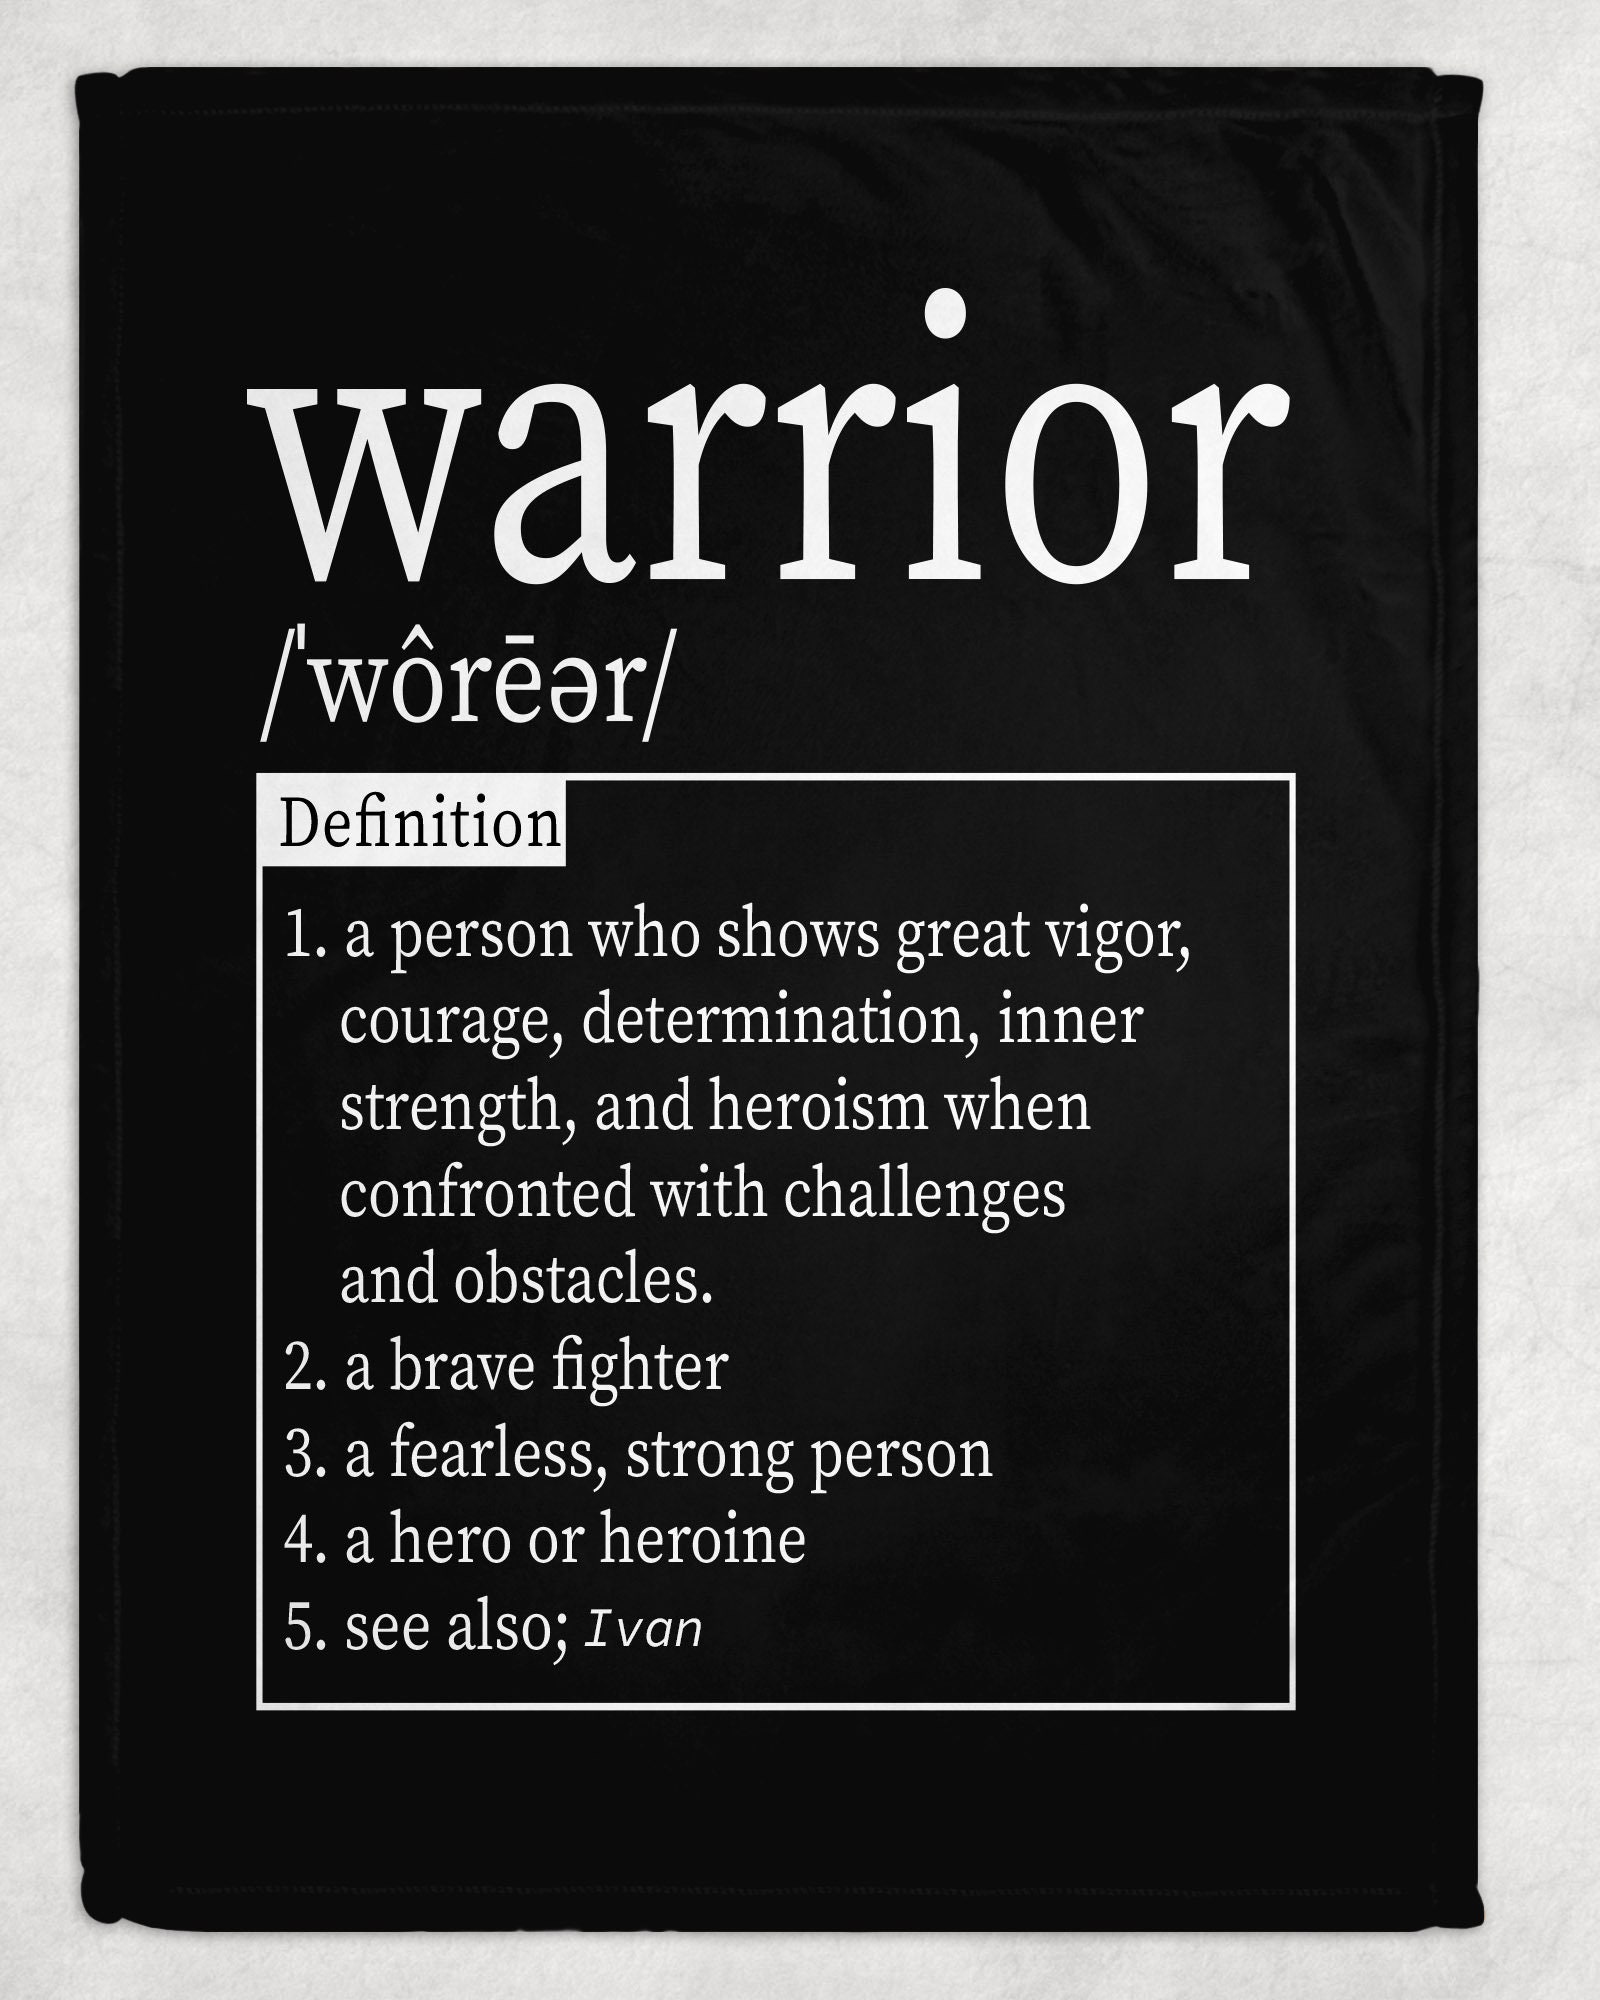 Warrior synonyms - 1 671 Words and Phrases for Warrior